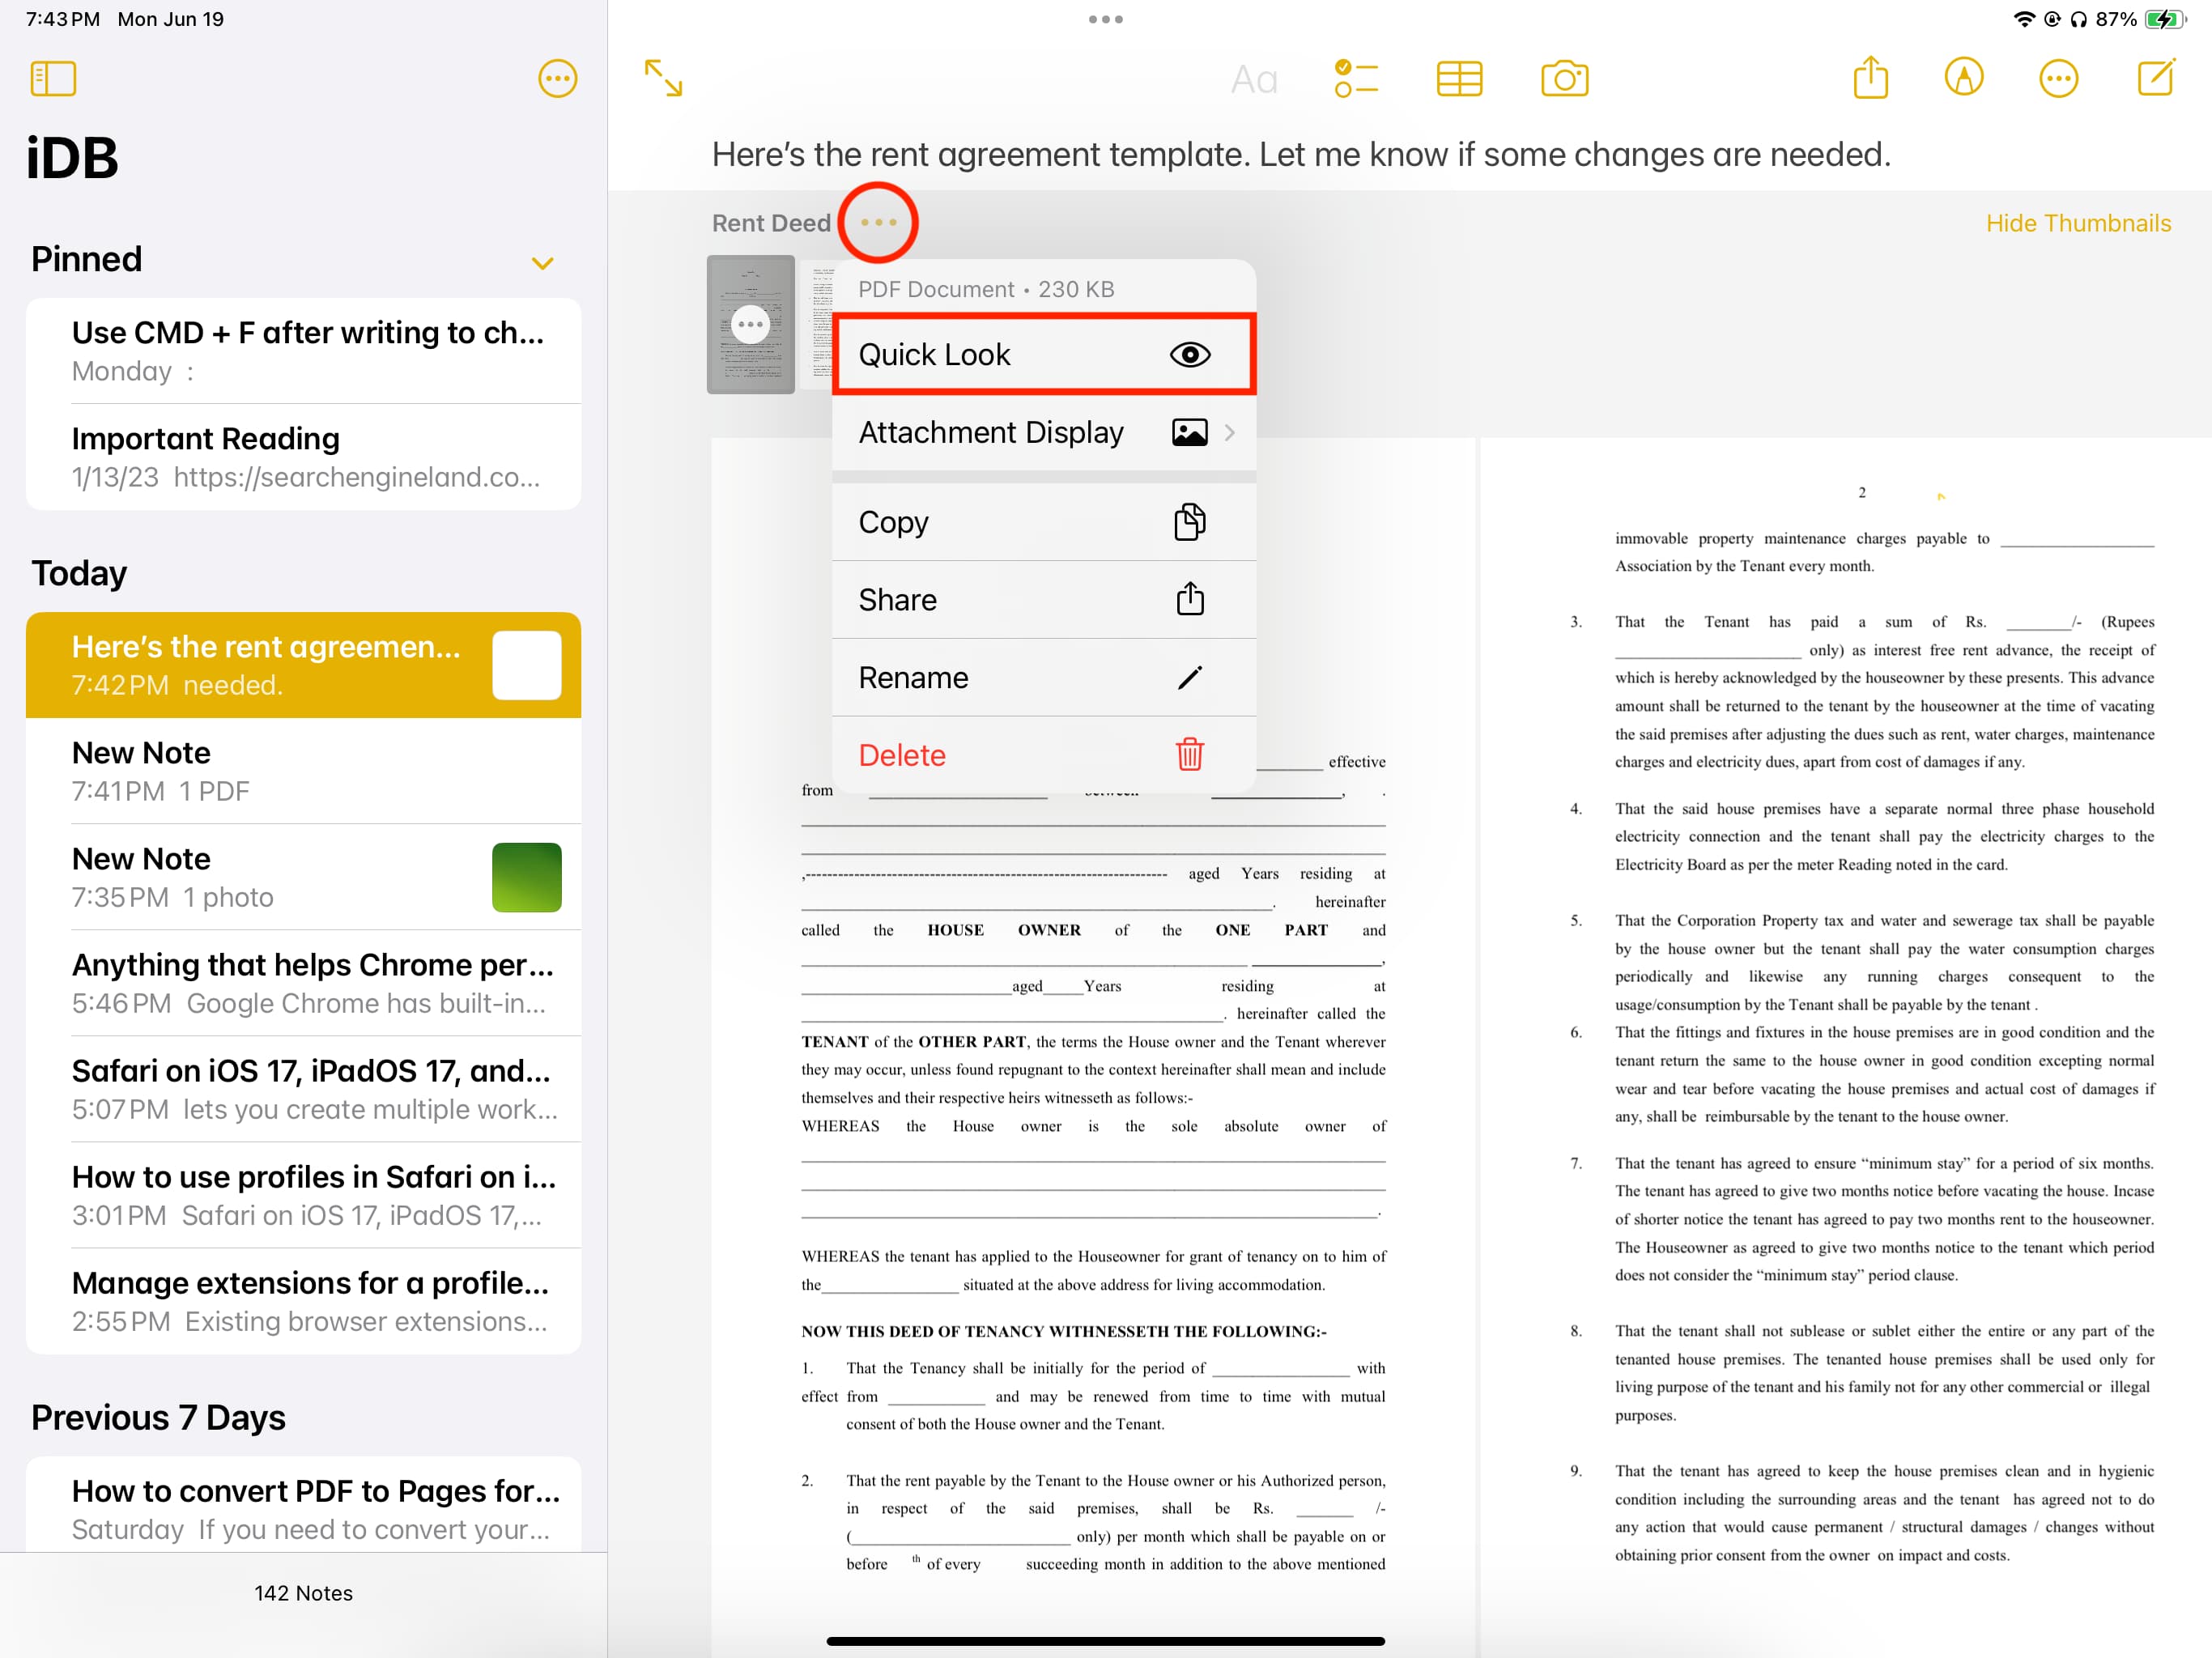 Quick Look for PDF in Notes app on iPad